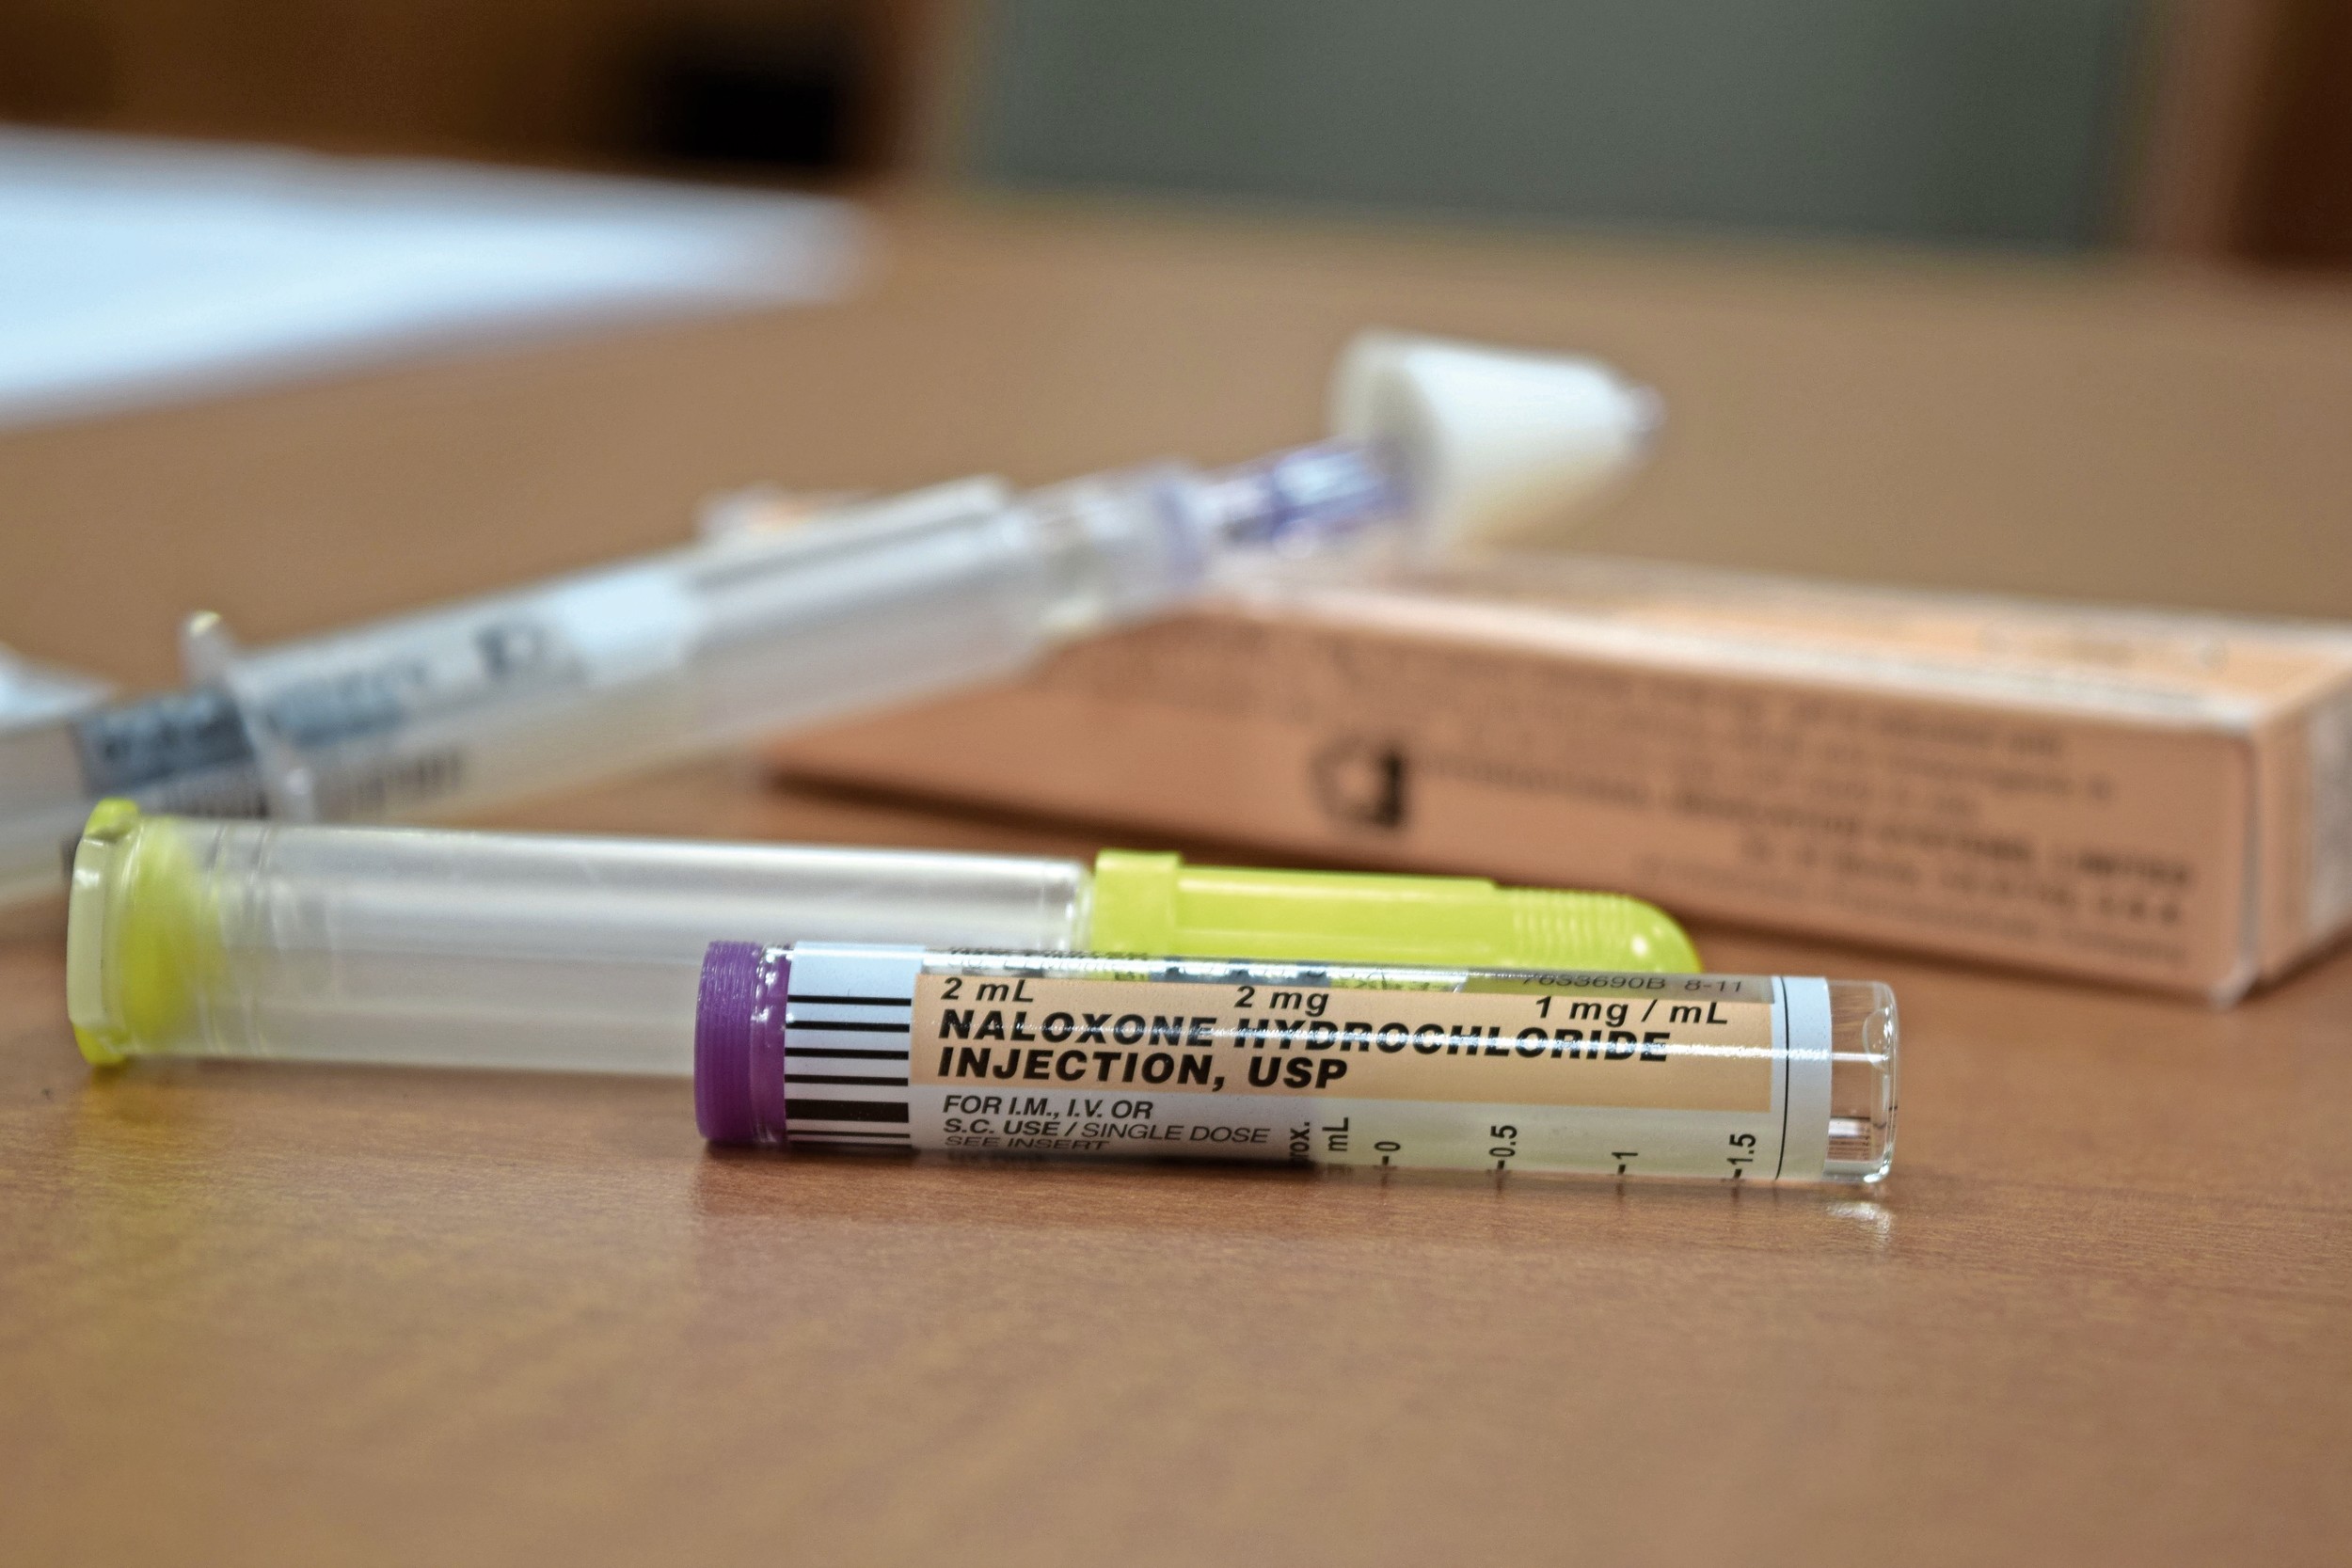 A Naloxone Hydrochloride injection, better known as Narcan, reverses a heroin overdose by blocking opioid receptors in the brain. The Levittown Community Action Coalition will hold Narcan seminars for community members.